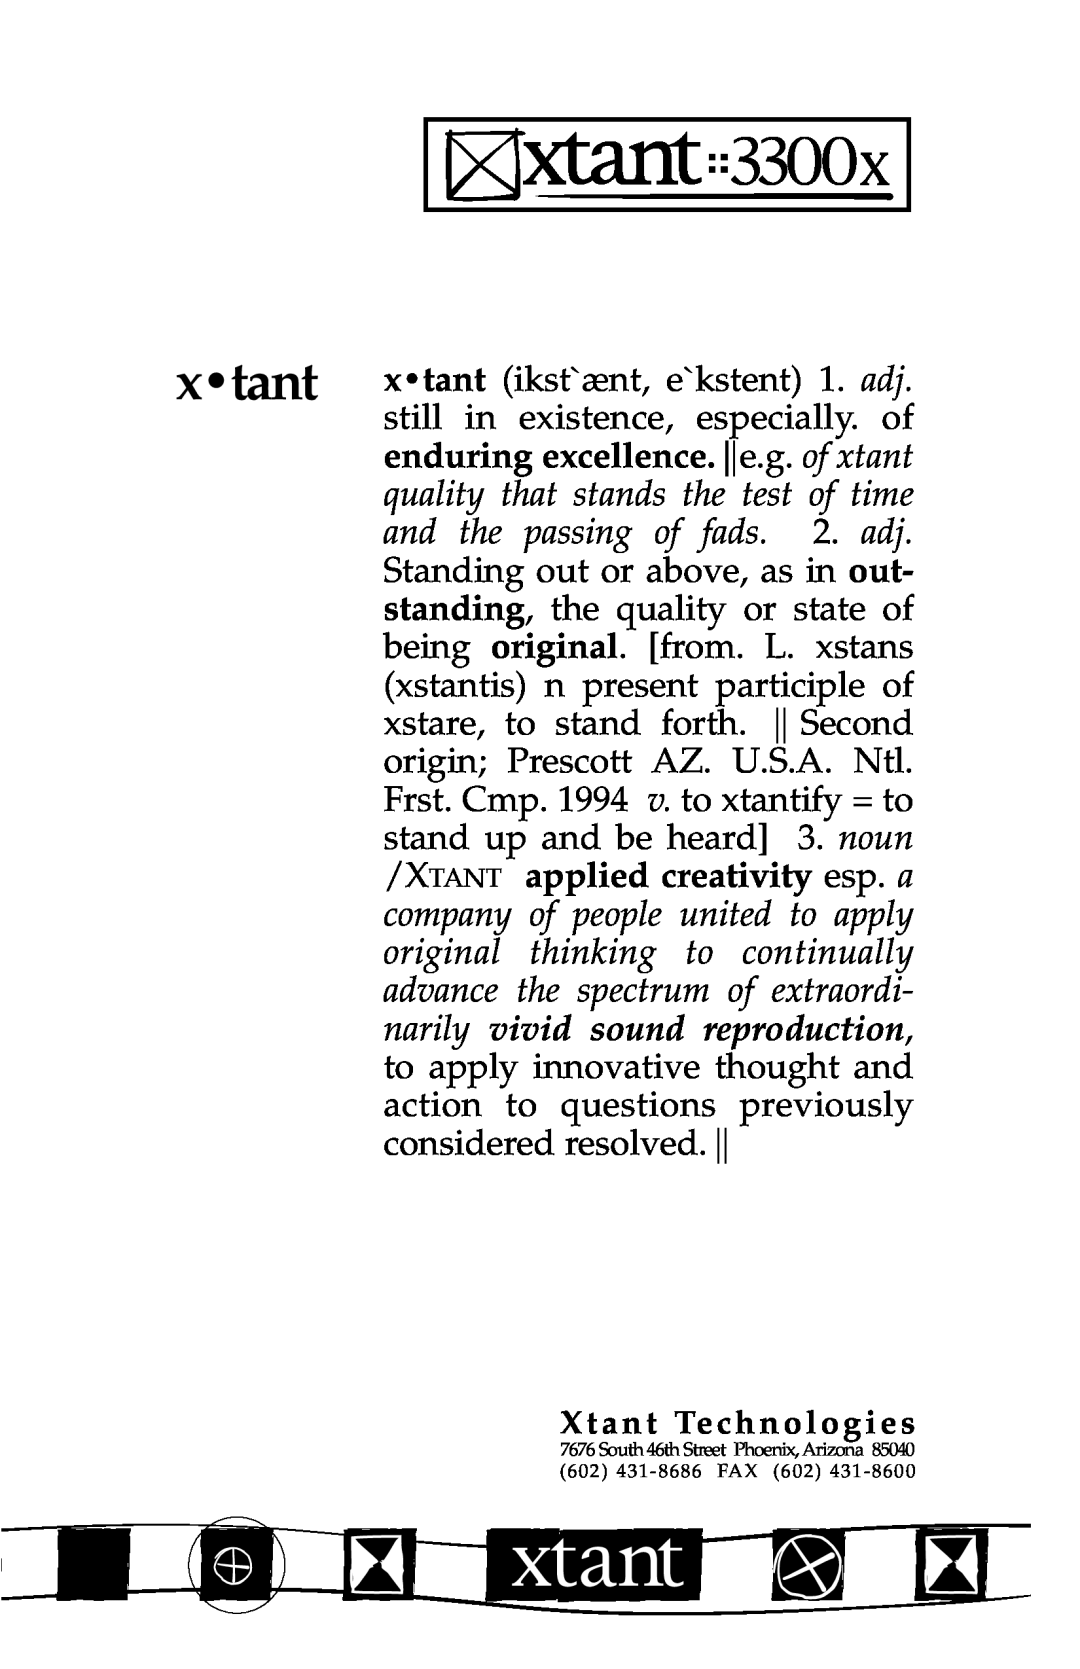 Xtant 3300x x tant, enduring excellence. e.g. of xtant, quality that stands the test of time, applied creativity esp. a 